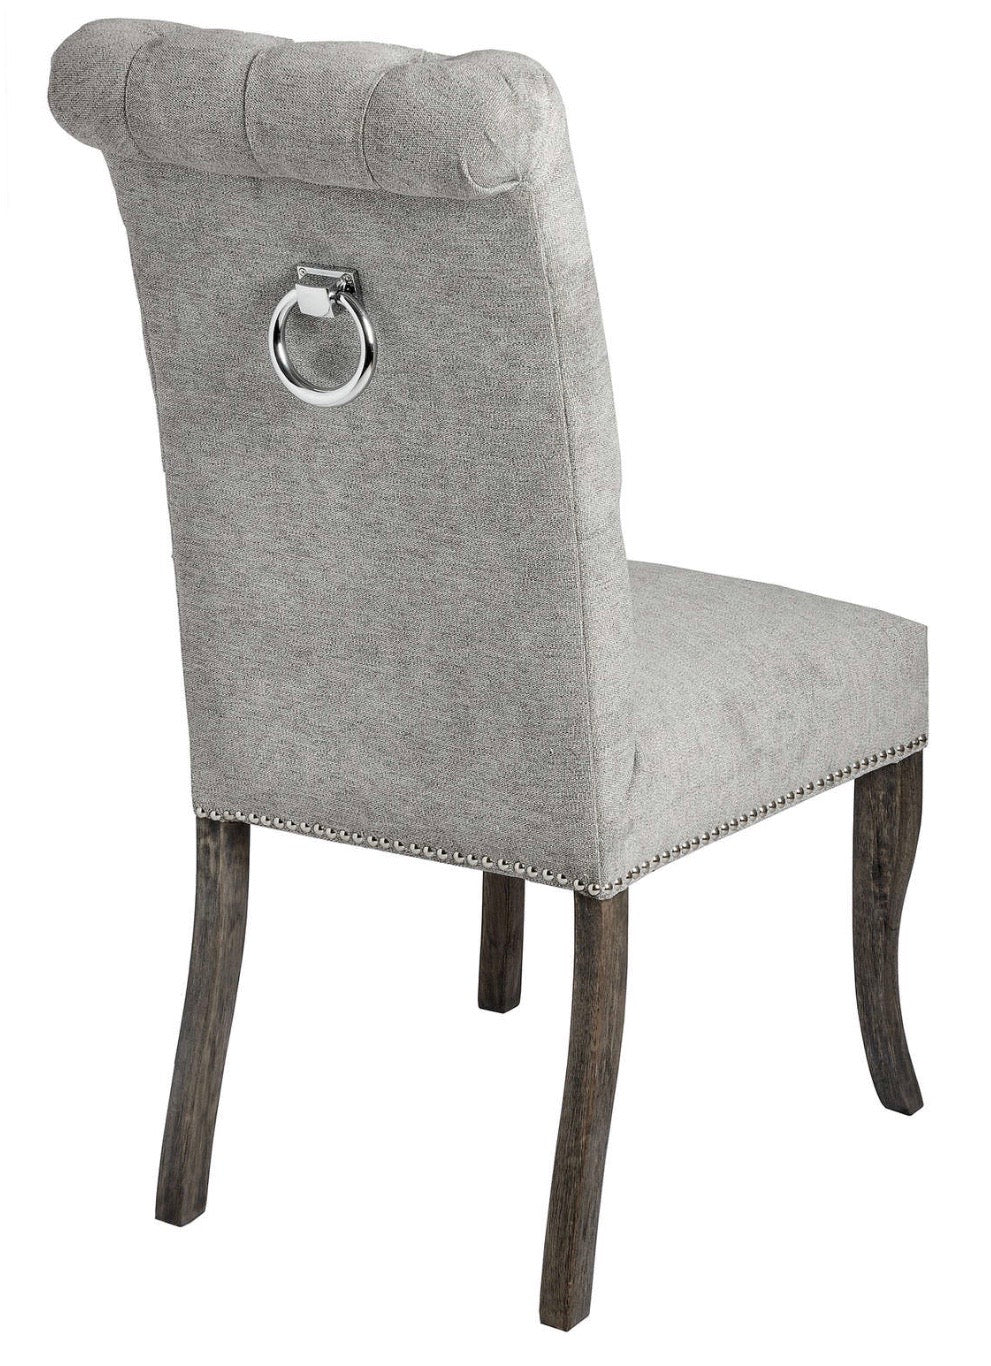 Warwick Roll Top Dining Chair with Ring Pull